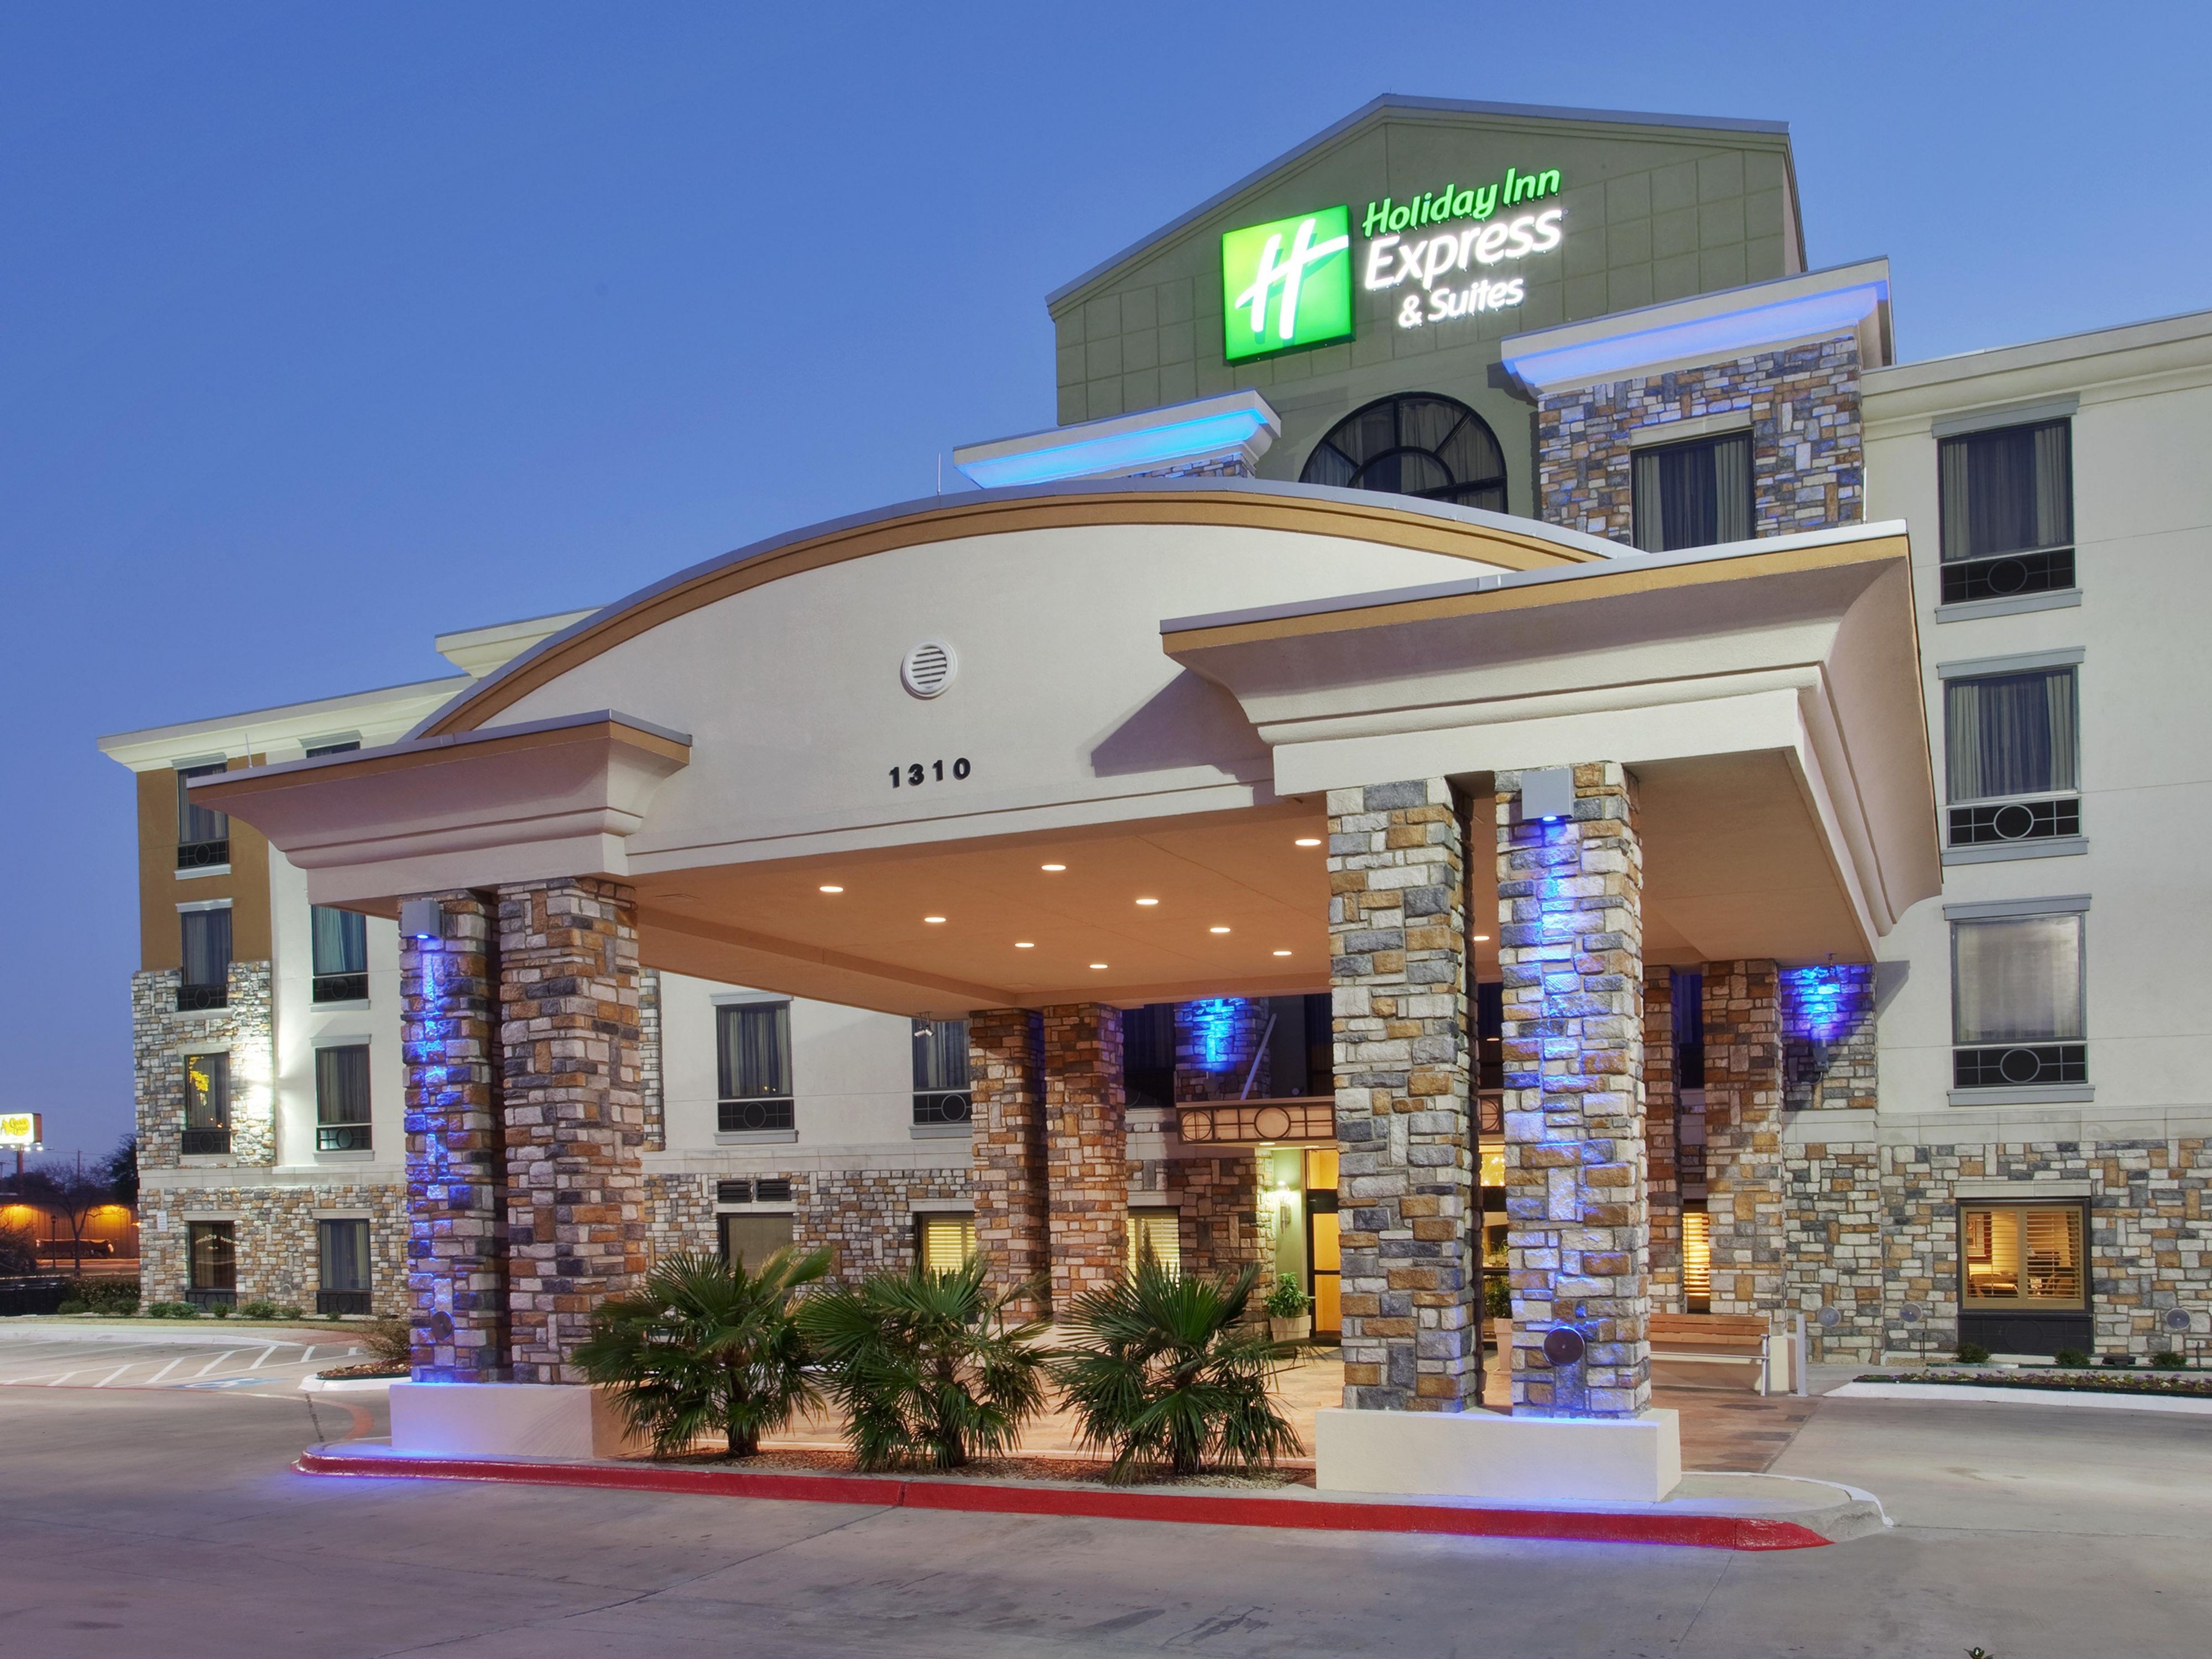 Candlewood Suites Fort Worth Extended Stay Hotels - 